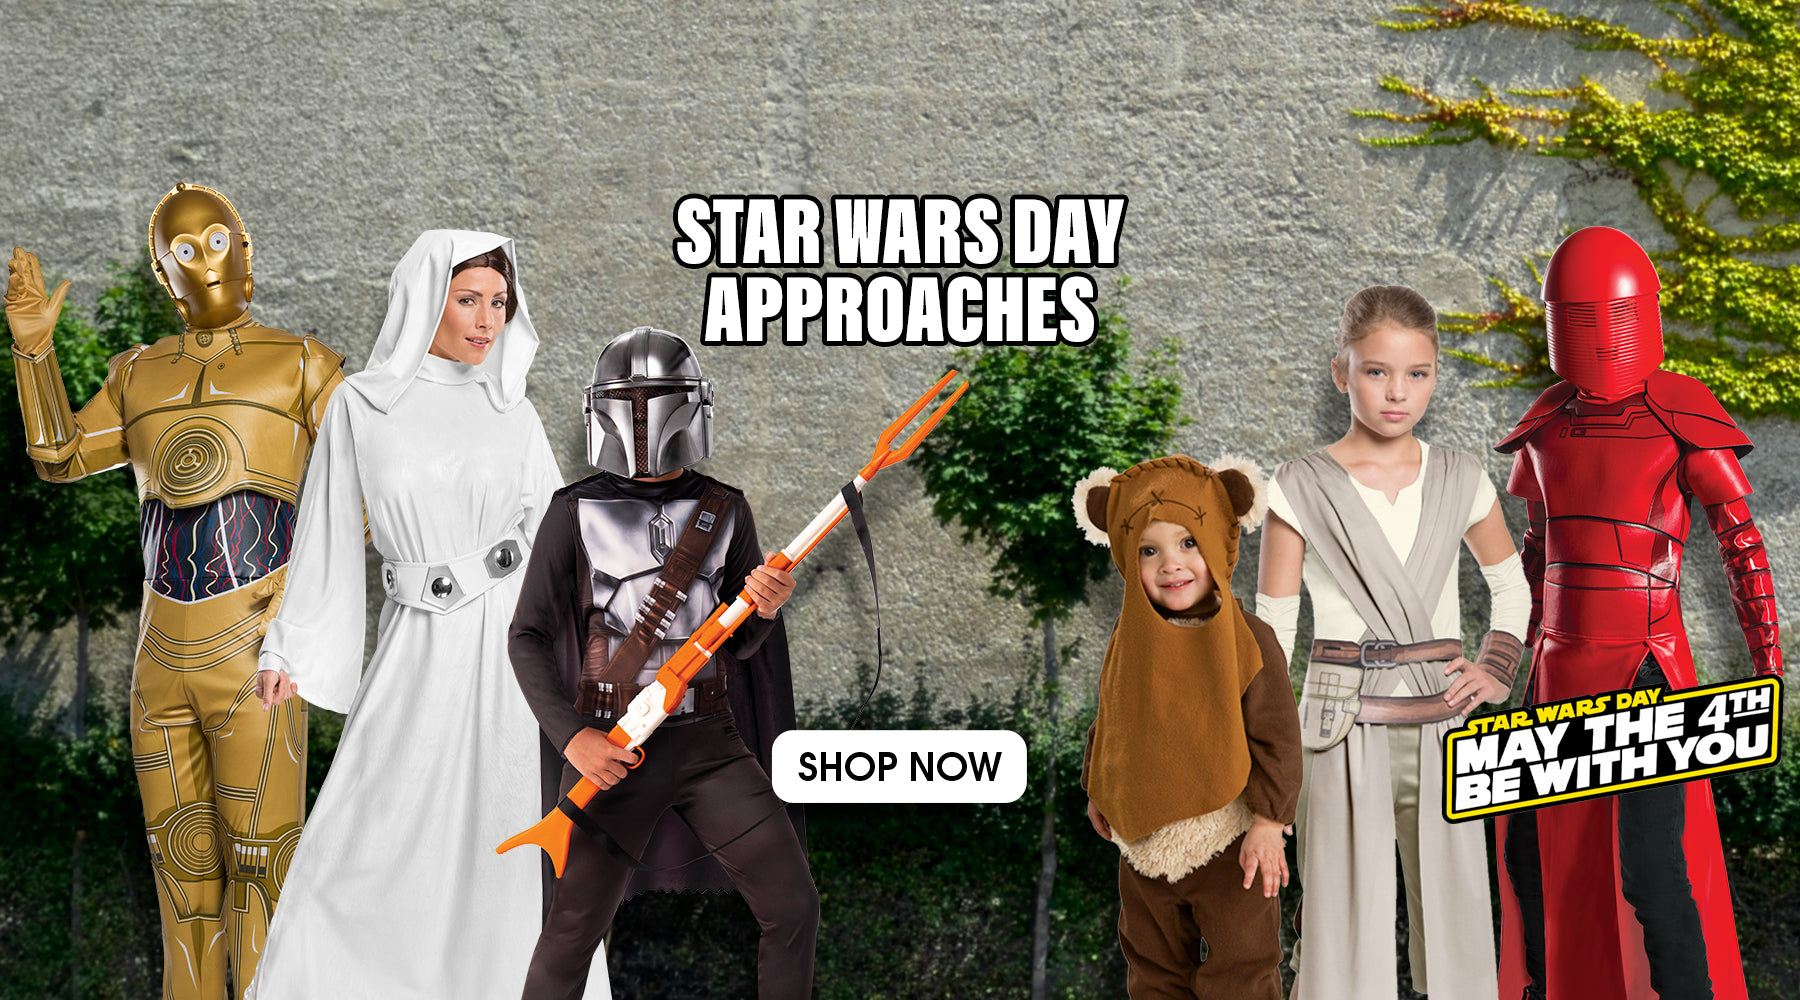 Star Wars Day 2024 is approaching at Ludicrous Speed! Get your officially licensed Star Wars costumes now and make it a fun day for the whole family (pets included!). Order online at Costume Super Centre Australia